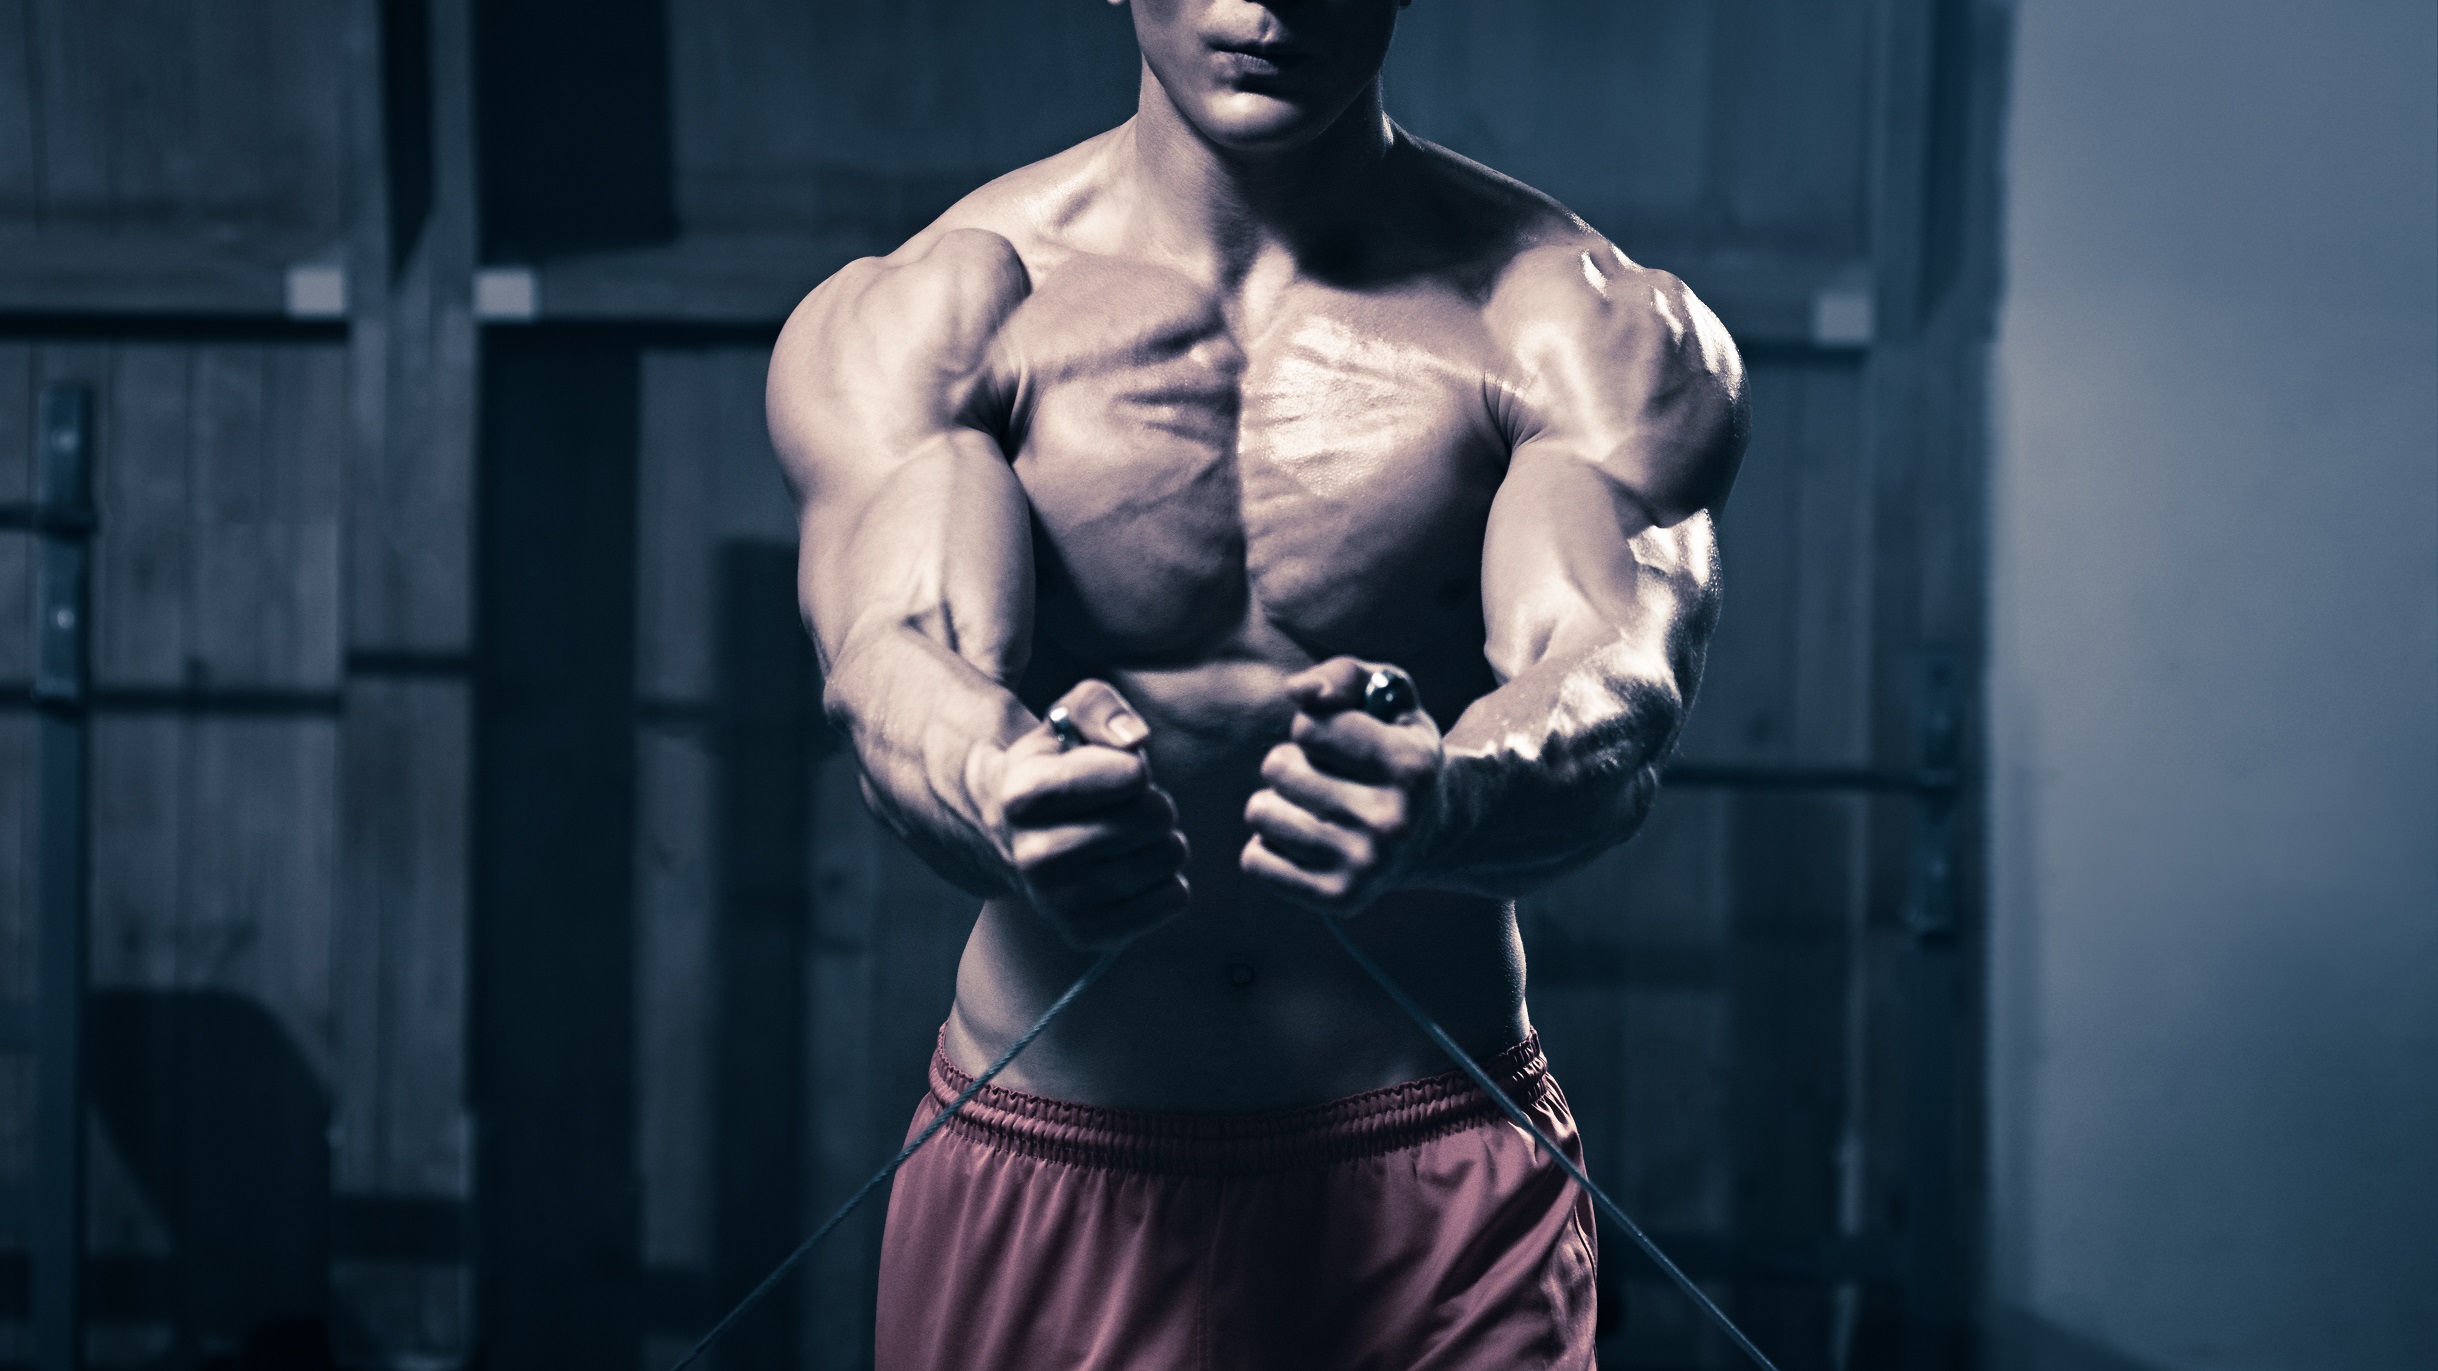 Chest workout - 8 exercises that make the inner chest line chiseled 